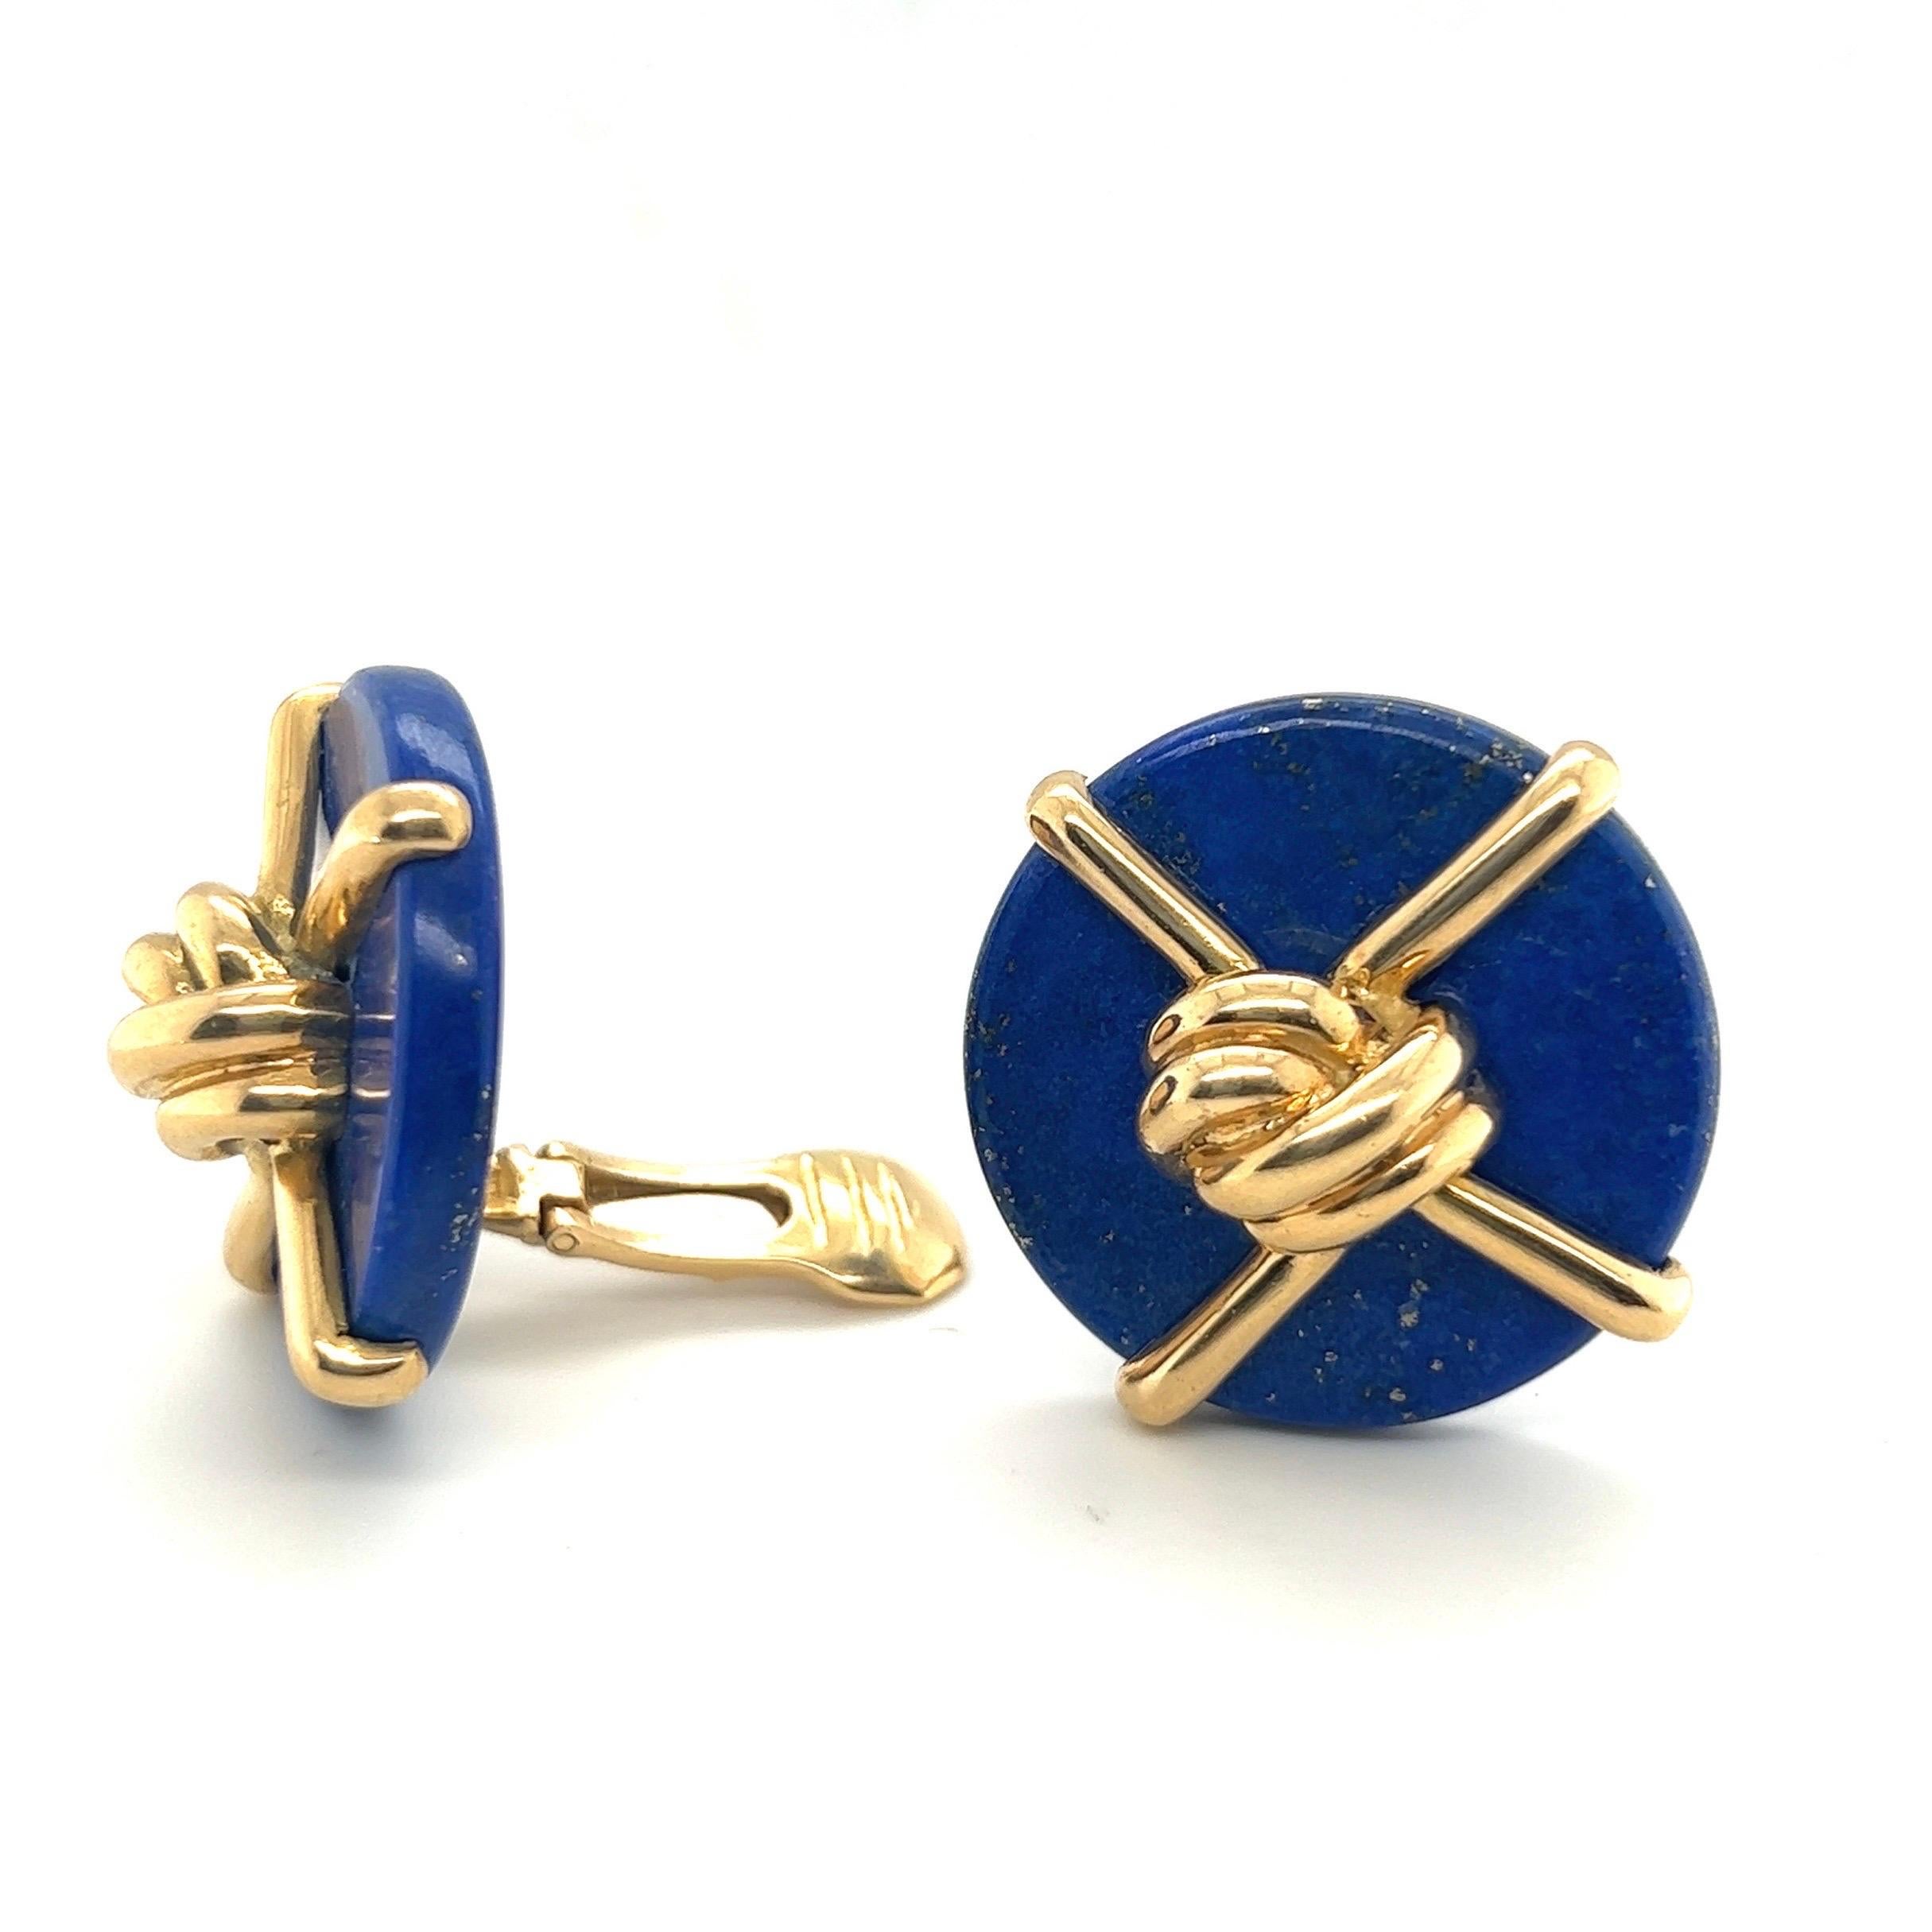 Iconic 18 karat gold lapis lazuli earrings designed by Aldo Cipullo for Cartier in 1973.
Geometrically designed ear clips each composed of a deep blue lapis lazuli disc, the front decorated with polished 18 karat yellow gold wire centering upon a